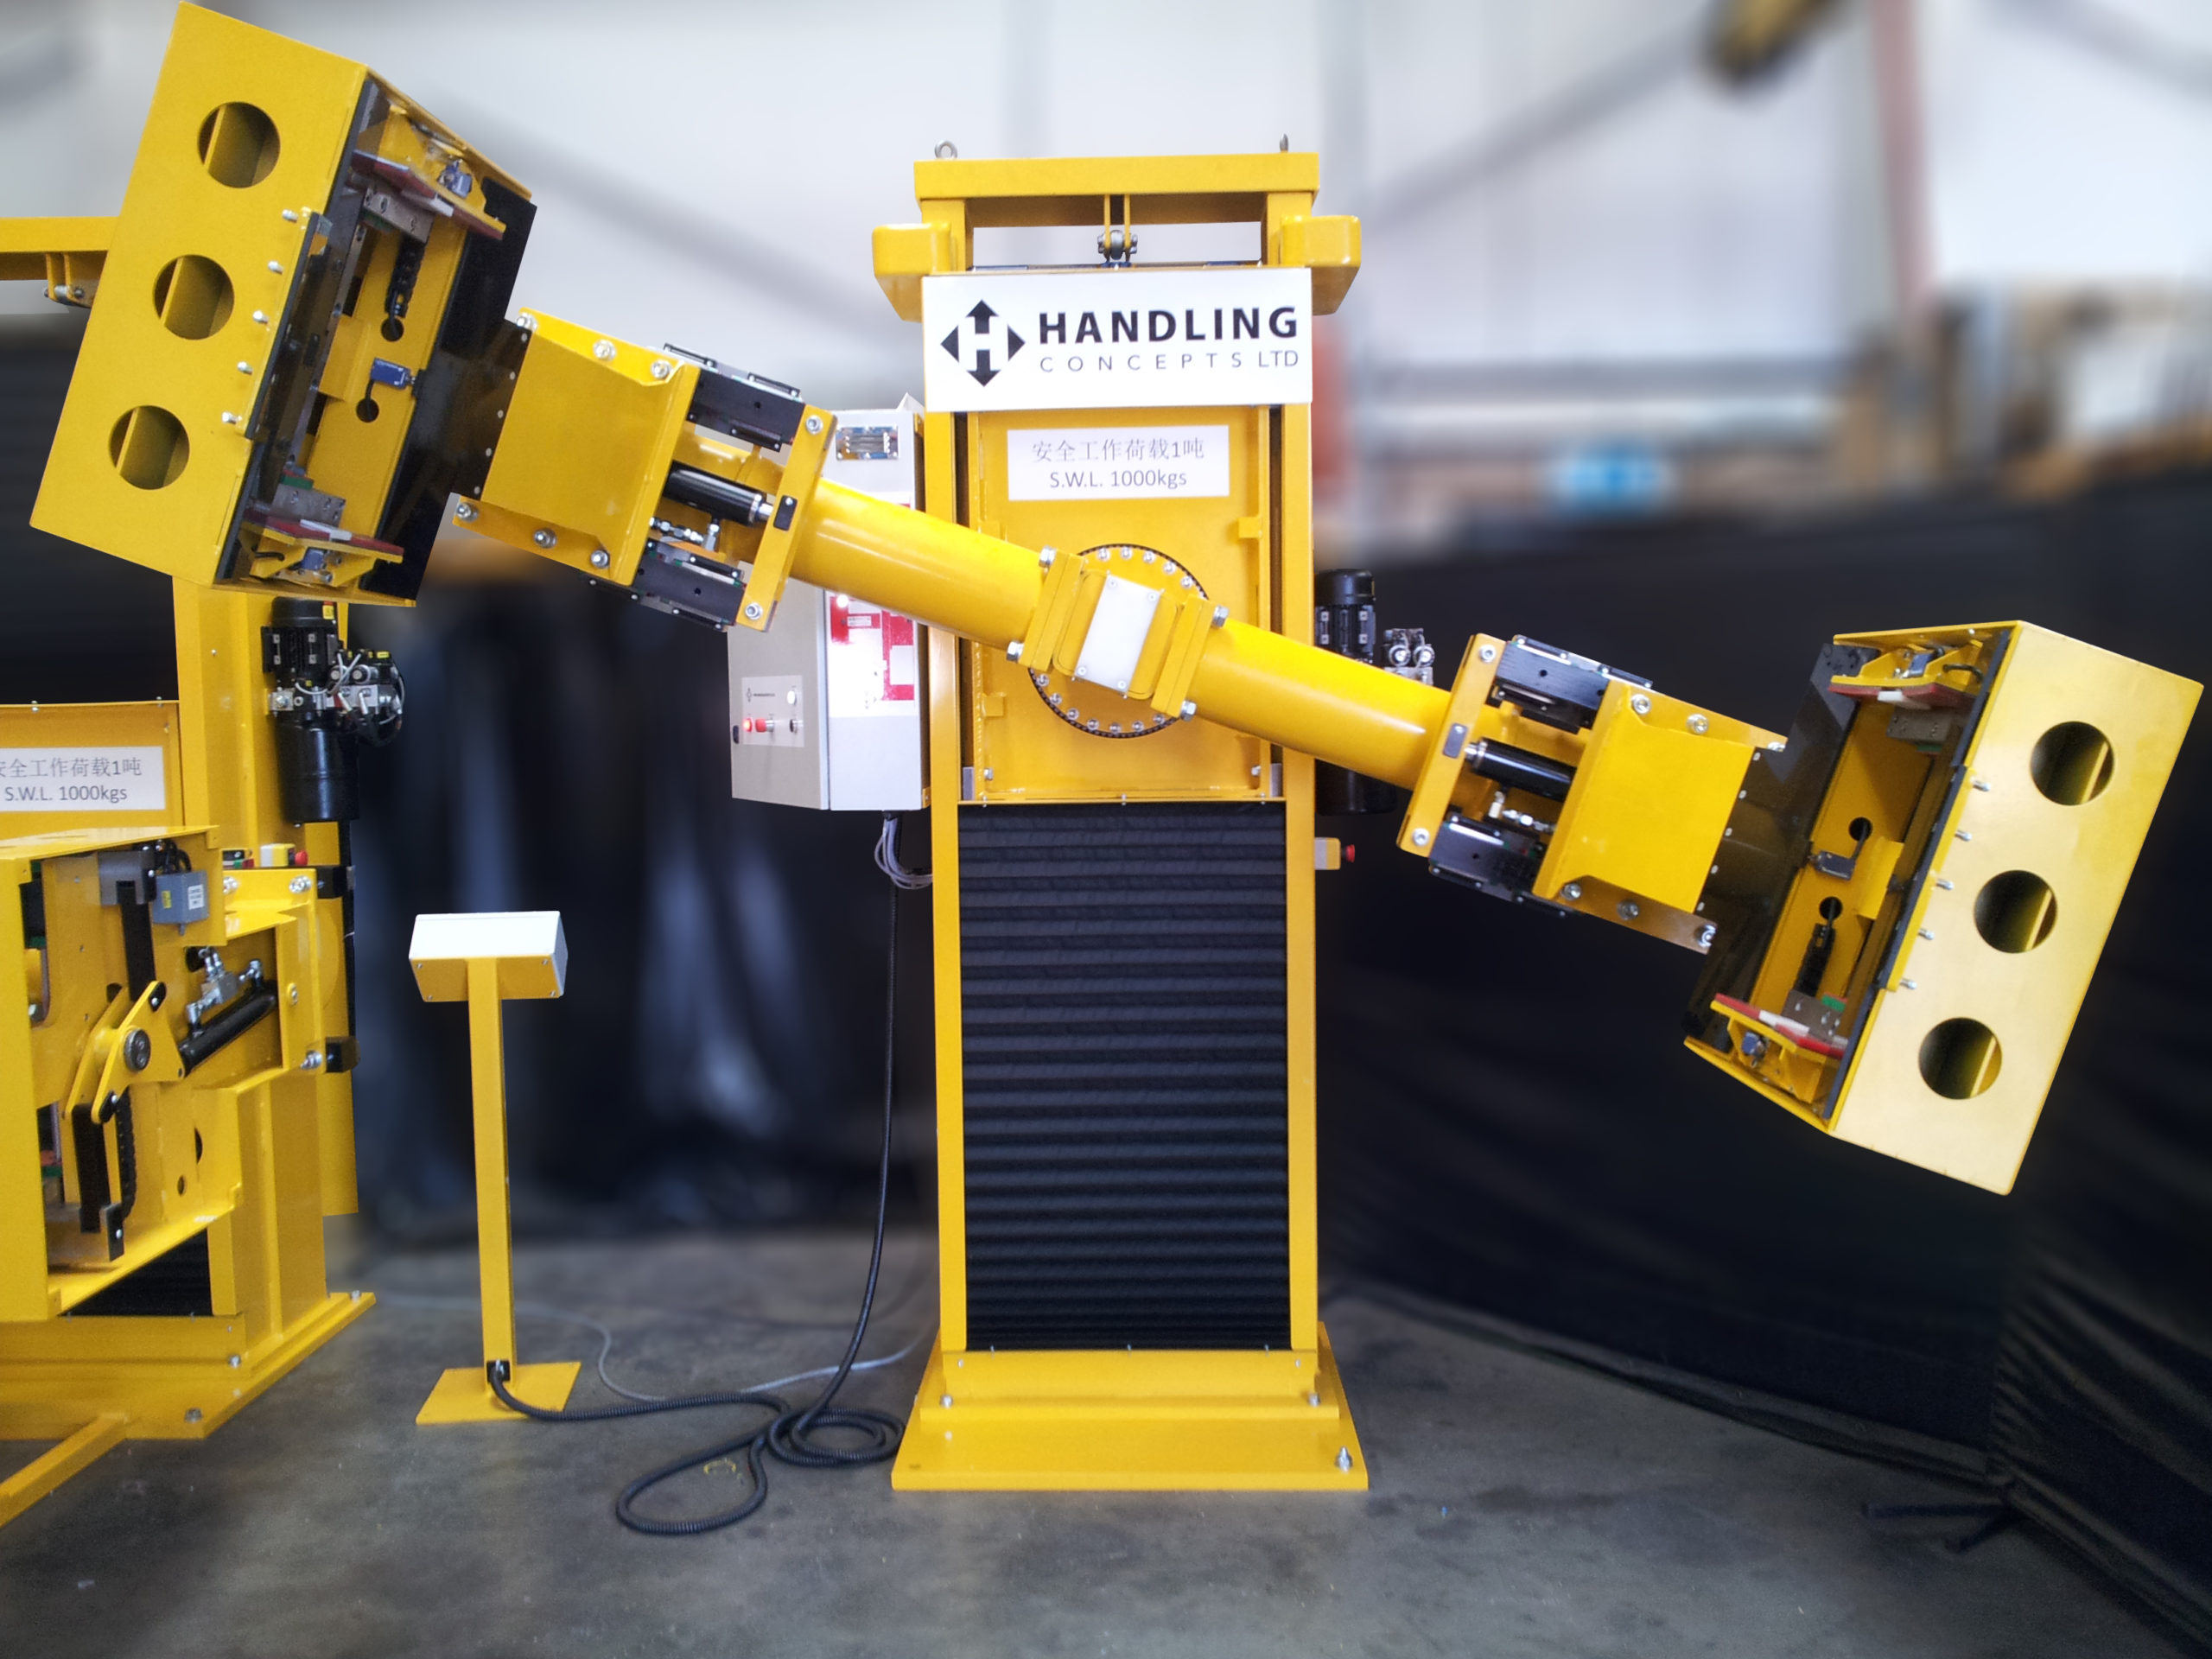 Handling Concepts' Lifting and Rotate Columns Material Handling Equipment Solution